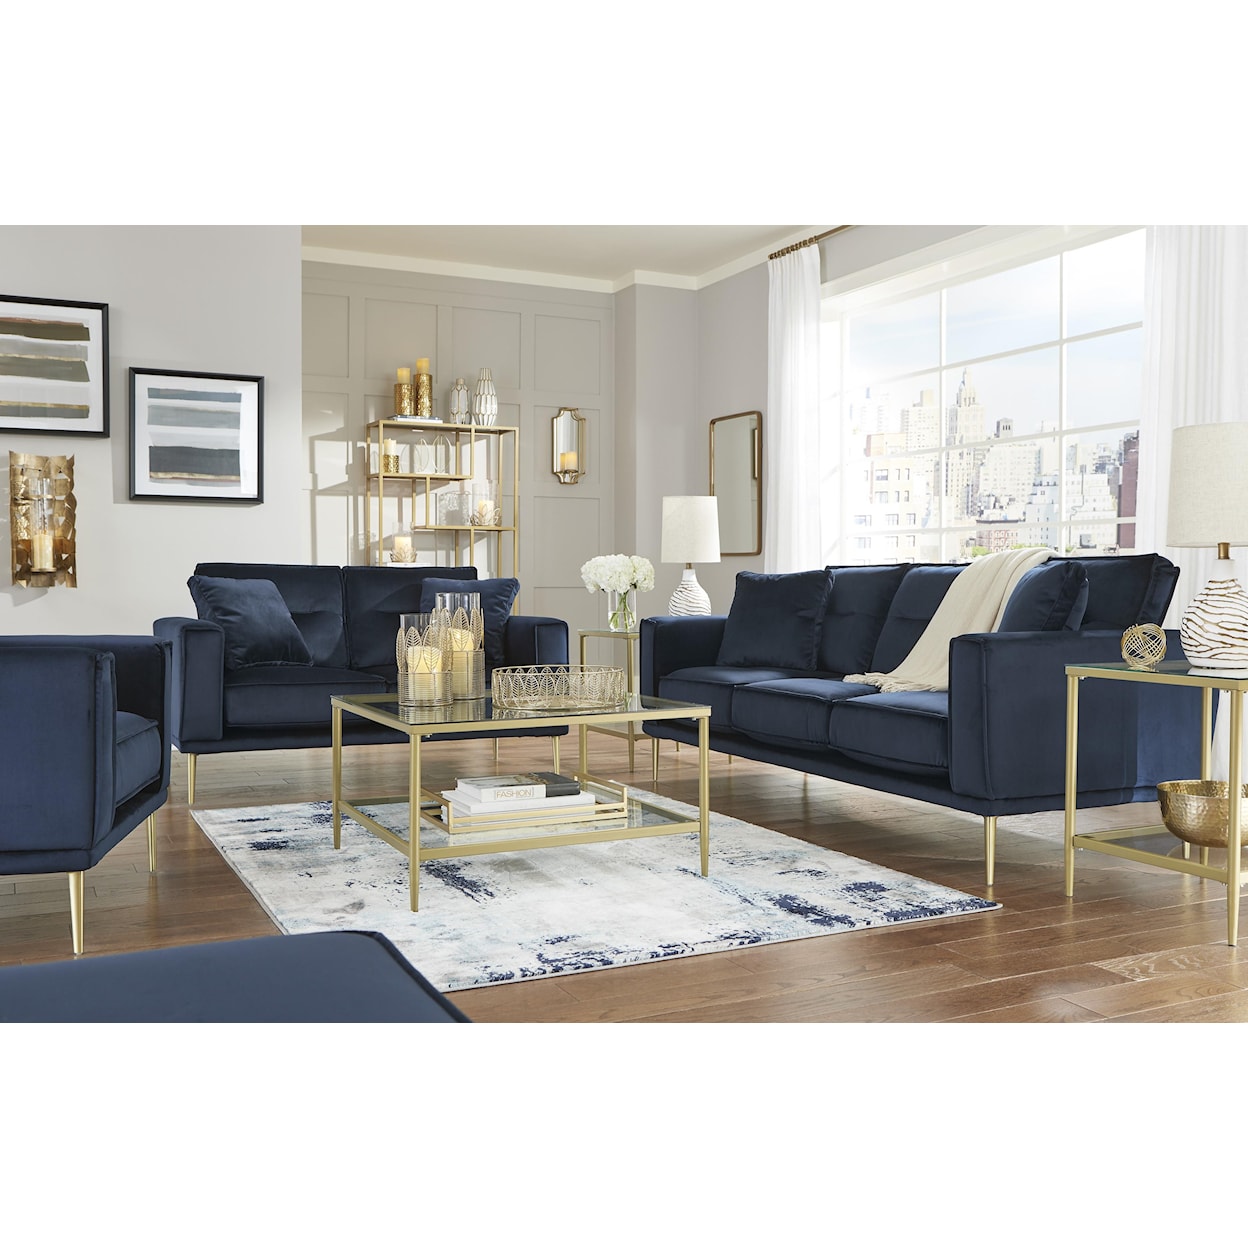 Signature Design by Ashley Macleary Sofa, Chair and Ottoman Set